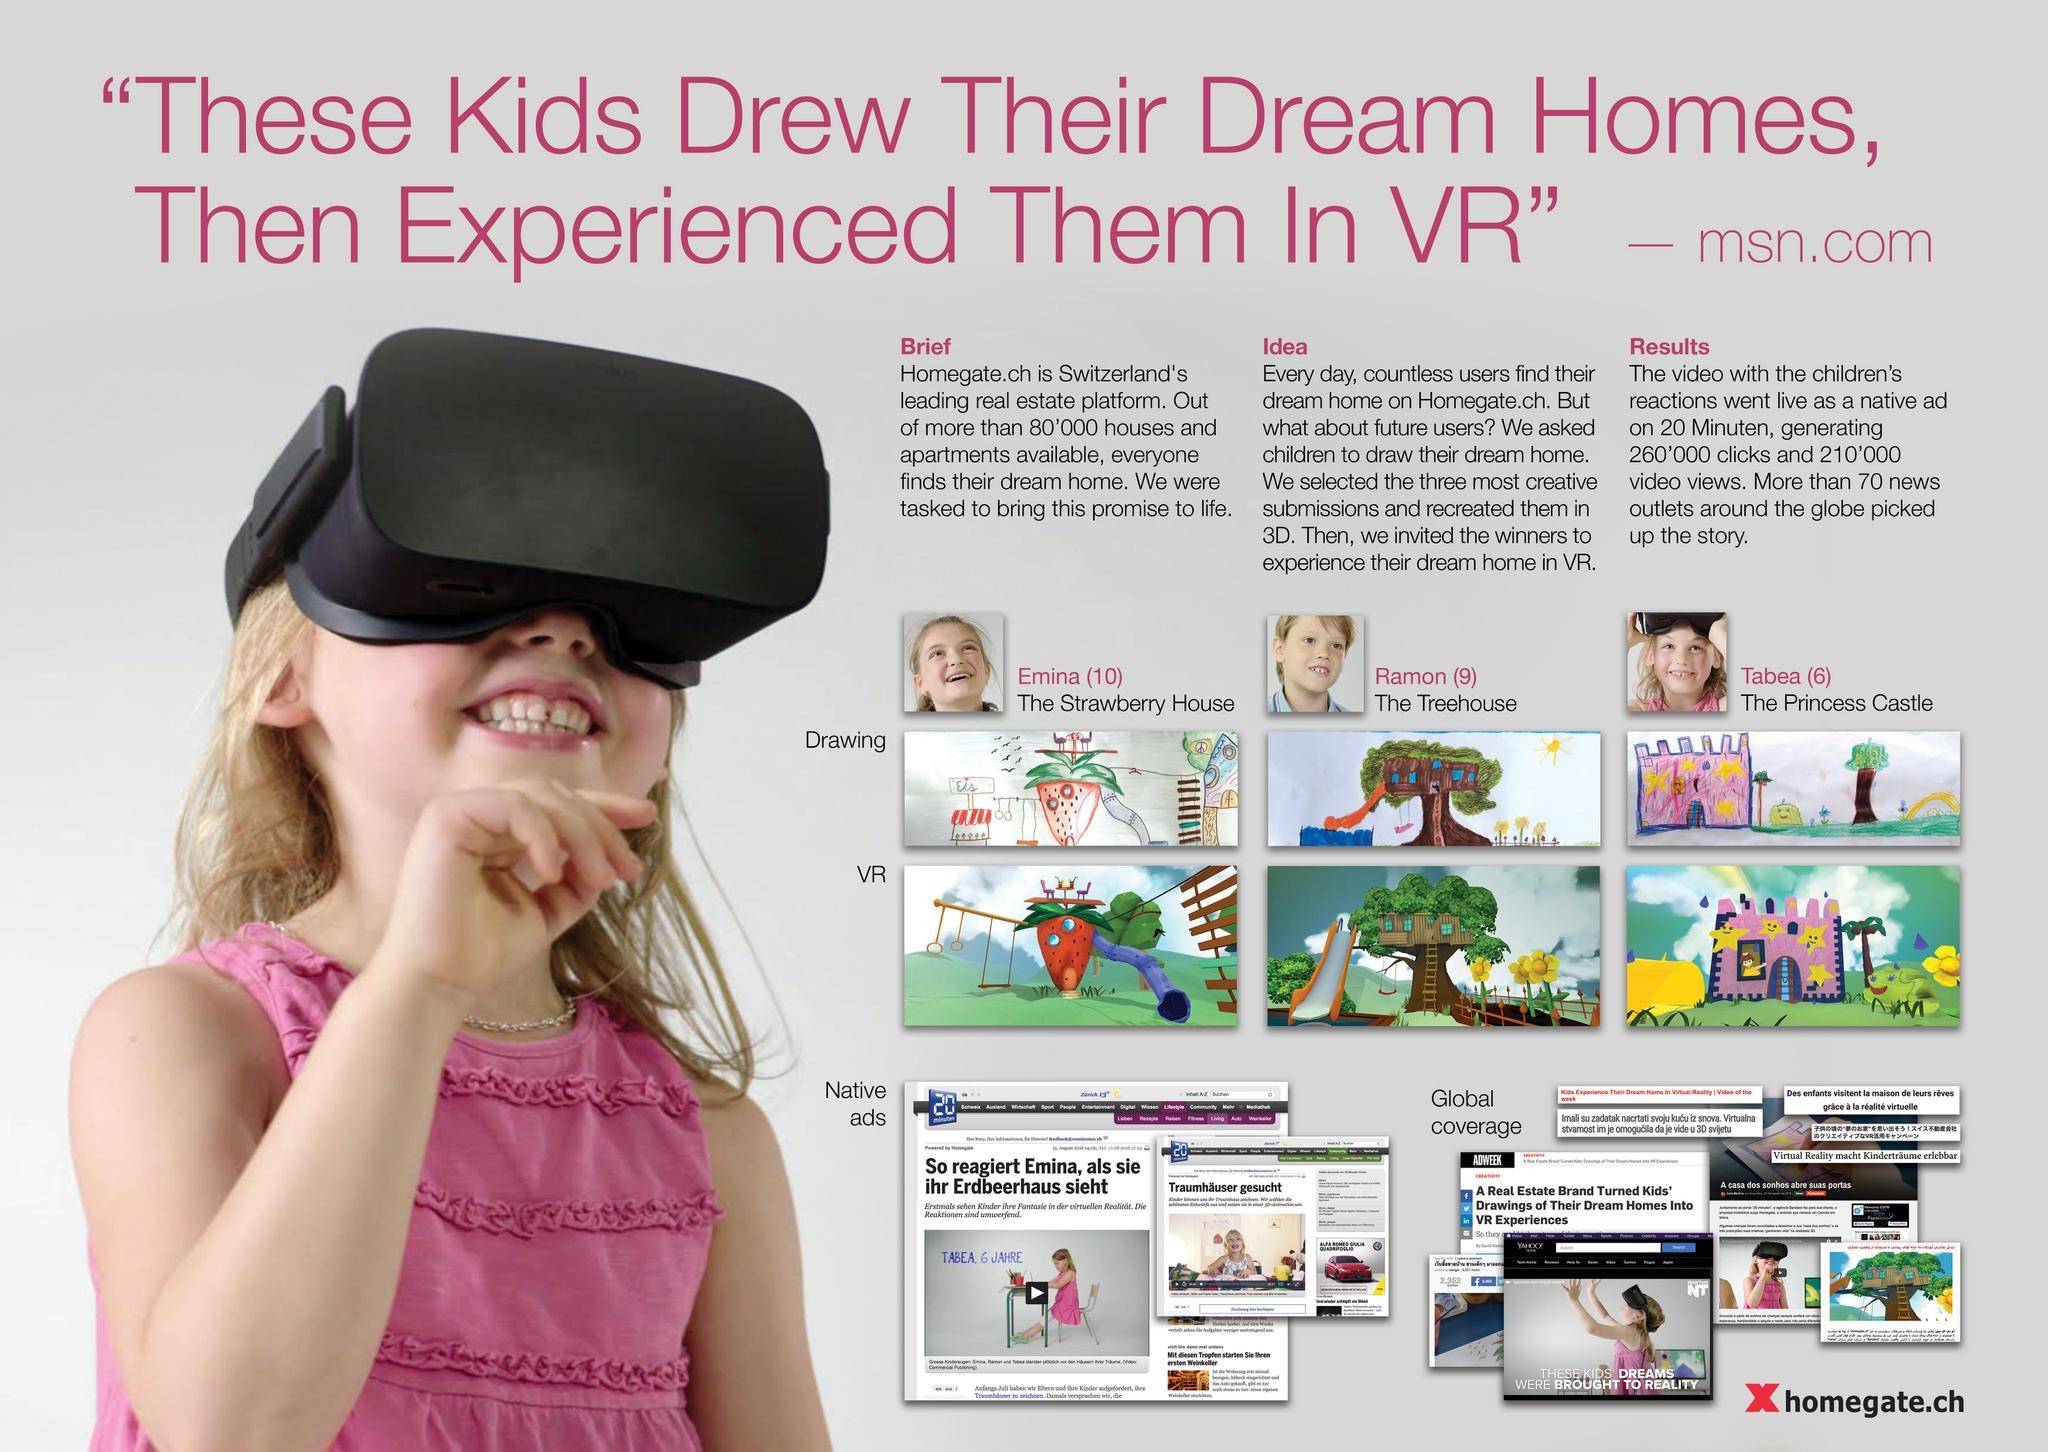 Kids Experience Their Dream Home in VR